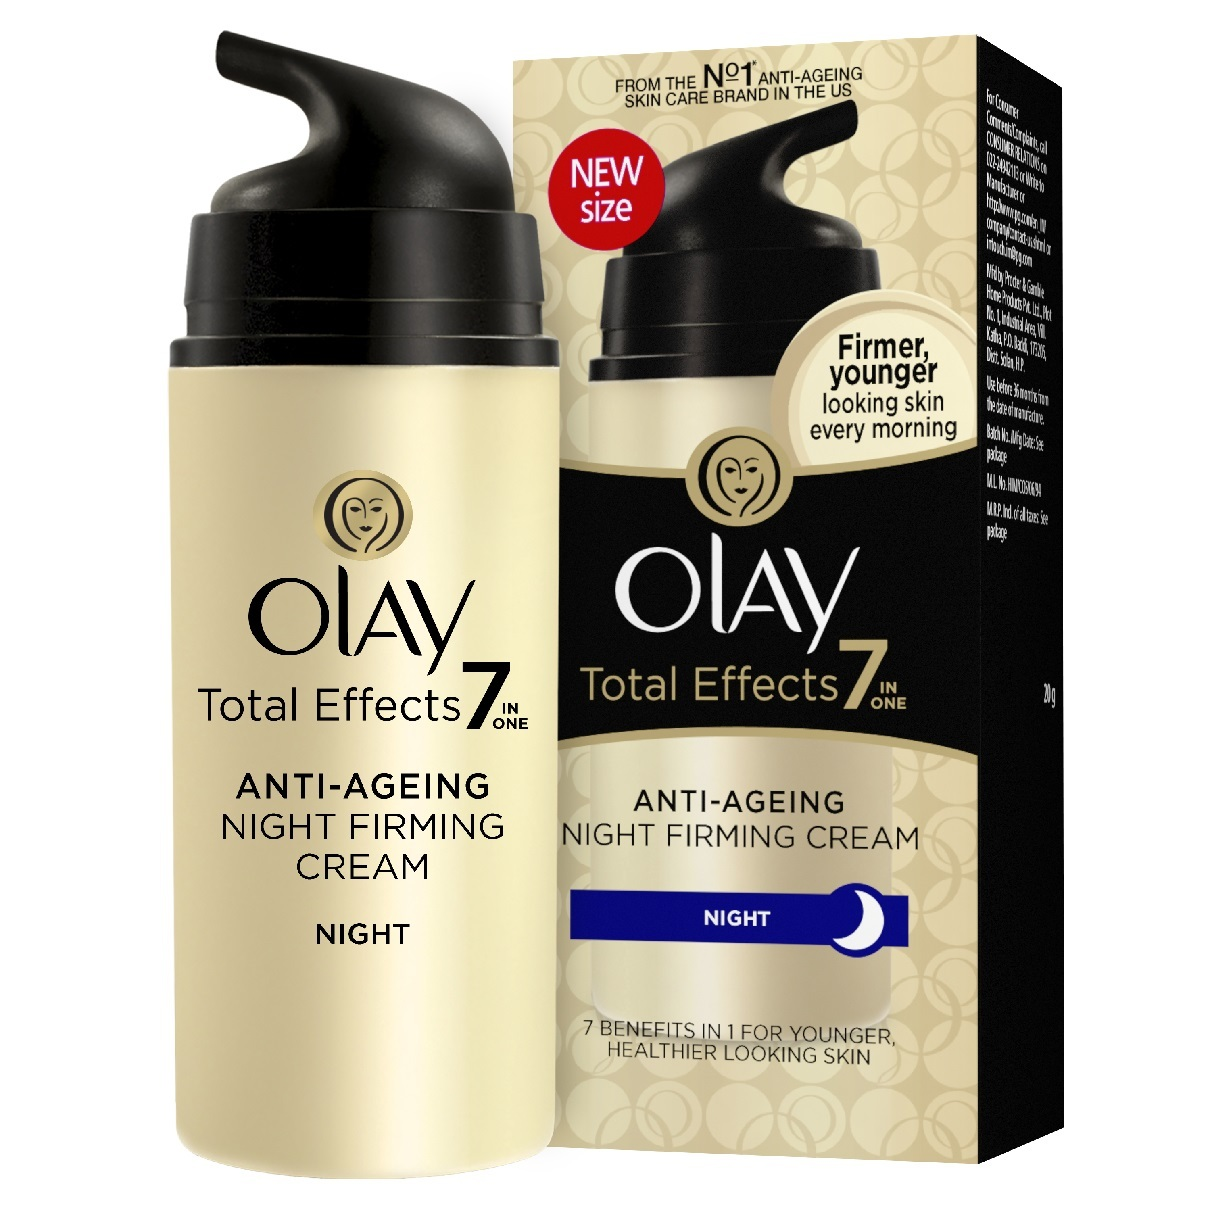 Olay Total Effects 7 in One Anti-ageing Night Cream